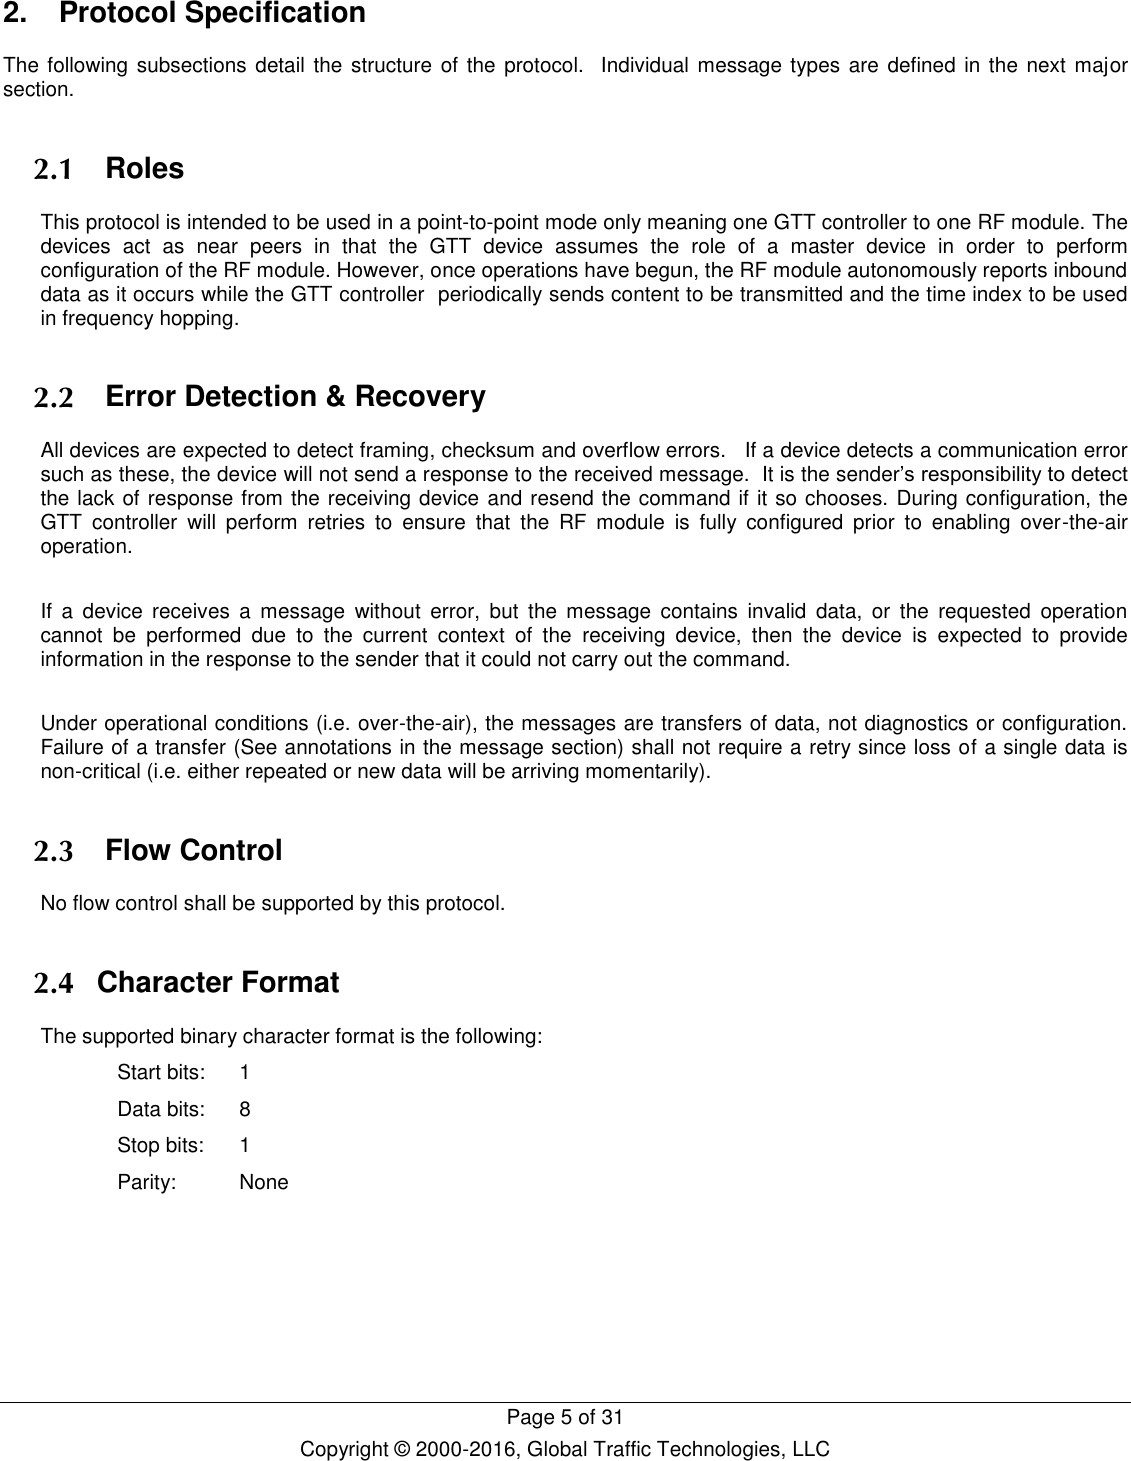   Page 5 of 31 Copyright © 2000-2016, Global Traffic Technologies, LLC 2.   Protocol Specification The following subsections detail the structure  of the protocol.  Individual message types are  defined in the next major section.    Roles This protocol is intended to be used in a point-to-point mode only meaning one GTT controller to one RF module. The devices  act  as  near  peers  in  that  the  GTT  device  assumes  the  role  of  a  master  device  in  order  to  perform configuration of the RF module. However, once operations have begun, the RF module autonomously reports inbound data as it occurs while the GTT controller  periodically sends content to be transmitted and the time index to be used in frequency hopping.      Error Detection &amp; Recovery All devices are expected to detect framing, checksum and overflow errors.   If a device detects a communication error such as these, the device will not send a response to the received message.  It is the sender’s responsibility to detect the lack of response from the receiving device and resend the command if it so chooses. During configuration, the GTT  controller  will  perform  retries  to  ensure  that  the  RF  module  is  fully  configured  prior  to  enabling  over-the-air operation.  If  a  device  receives  a  message  without  error,  but  the  message  contains  invalid  data,  or  the  requested  operation cannot  be  performed  due  to  the  current  context  of  the  receiving  device,  then  the  device  is  expected  to  provide information in the response to the sender that it could not carry out the command.    Under operational conditions (i.e. over-the-air), the messages are transfers of data, not diagnostics or configuration. Failure of a transfer (See annotations in the message section) shall not require a retry since loss of a single data is non-critical (i.e. either repeated or new data will be arriving momentarily).    Flow Control No flow control shall be supported by this protocol.      Character Format The supported binary character format is the following: Start bits: 1 Data bits: 8 Stop bits: 1 Parity: None    